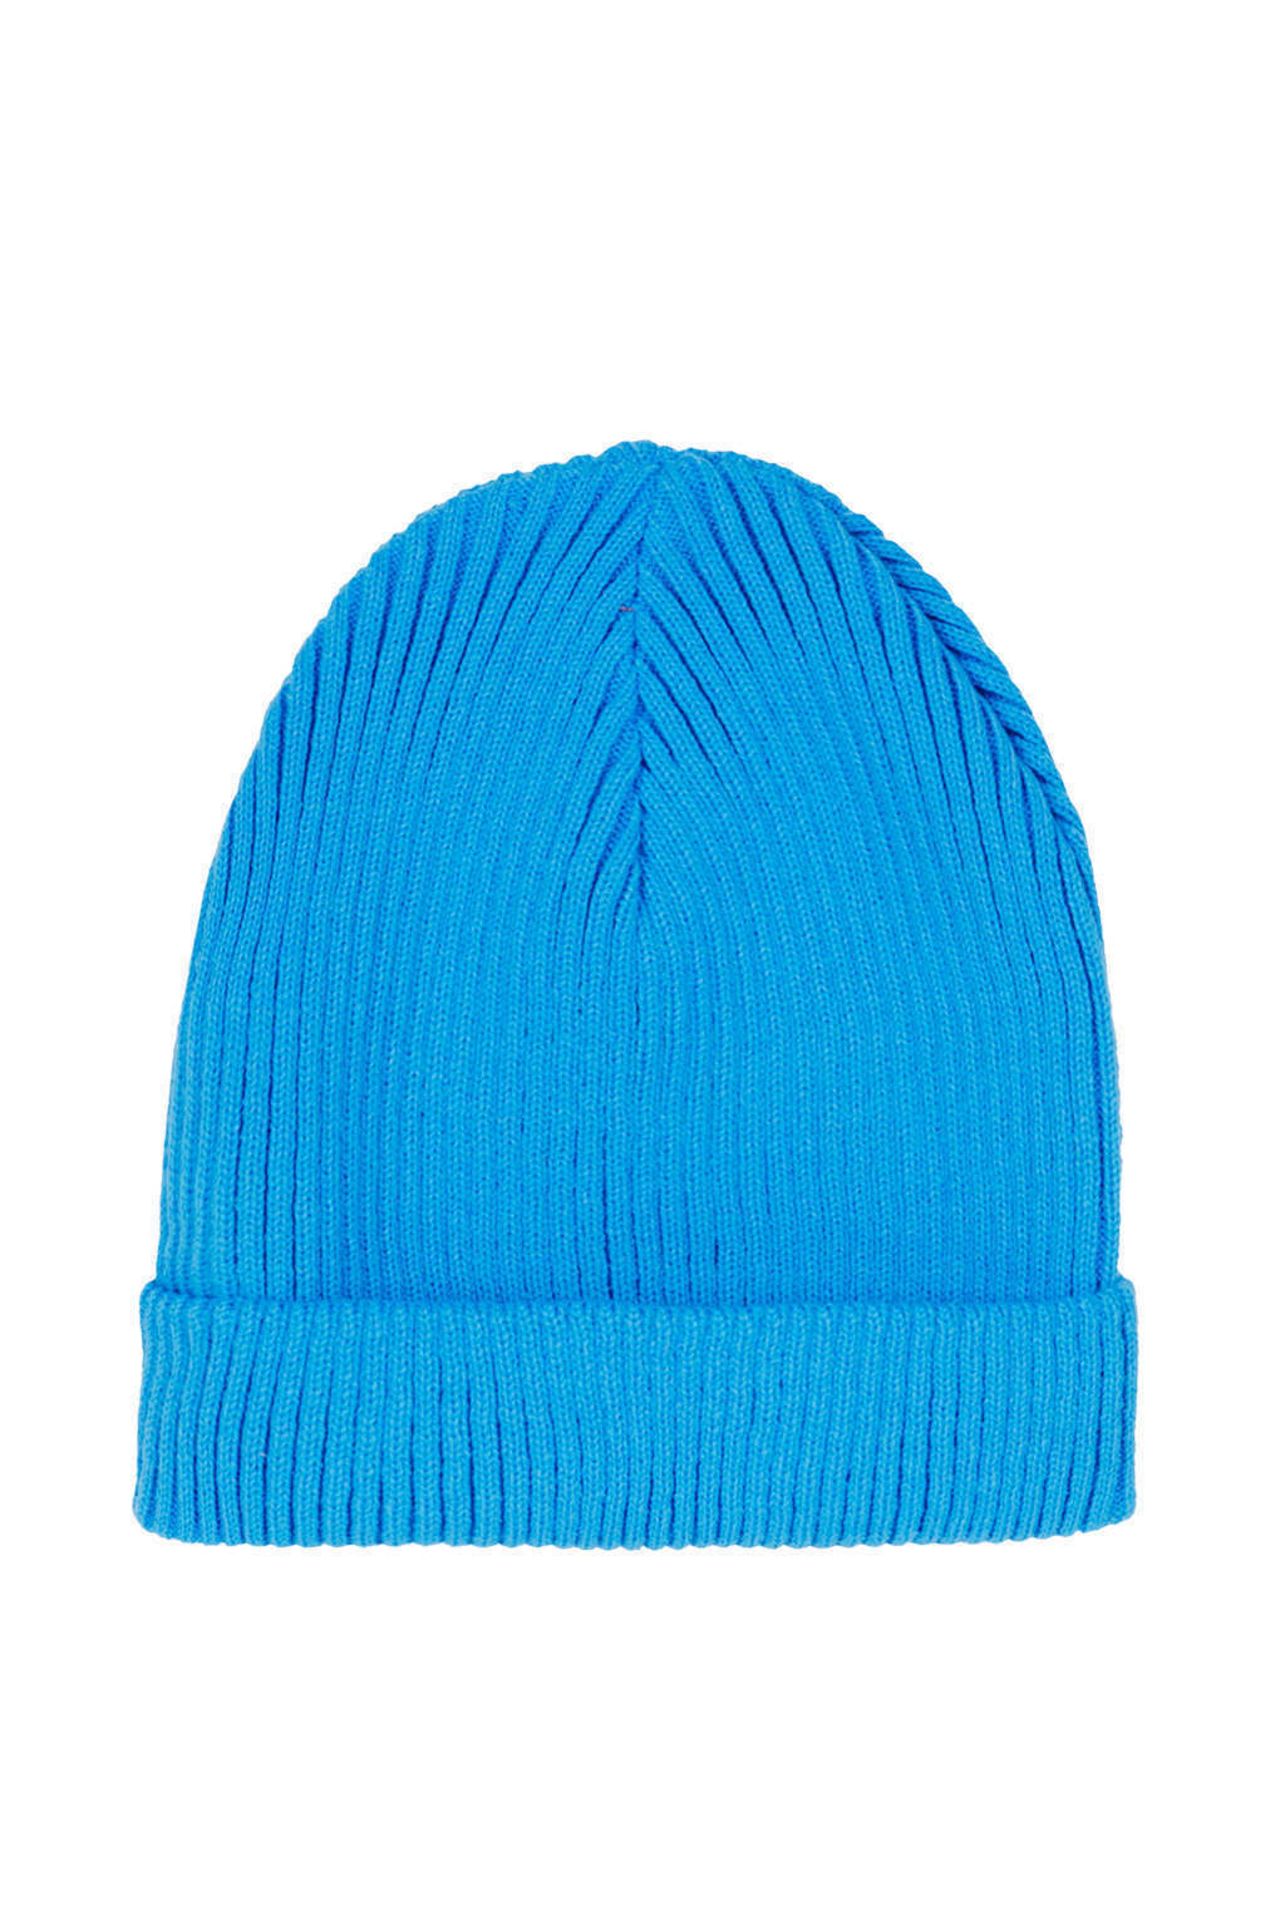 Liquidation Stock- New Tags Ladies Beanie Hat Made In Britain Blue Knit Hat x 15 - Image 2 of 2